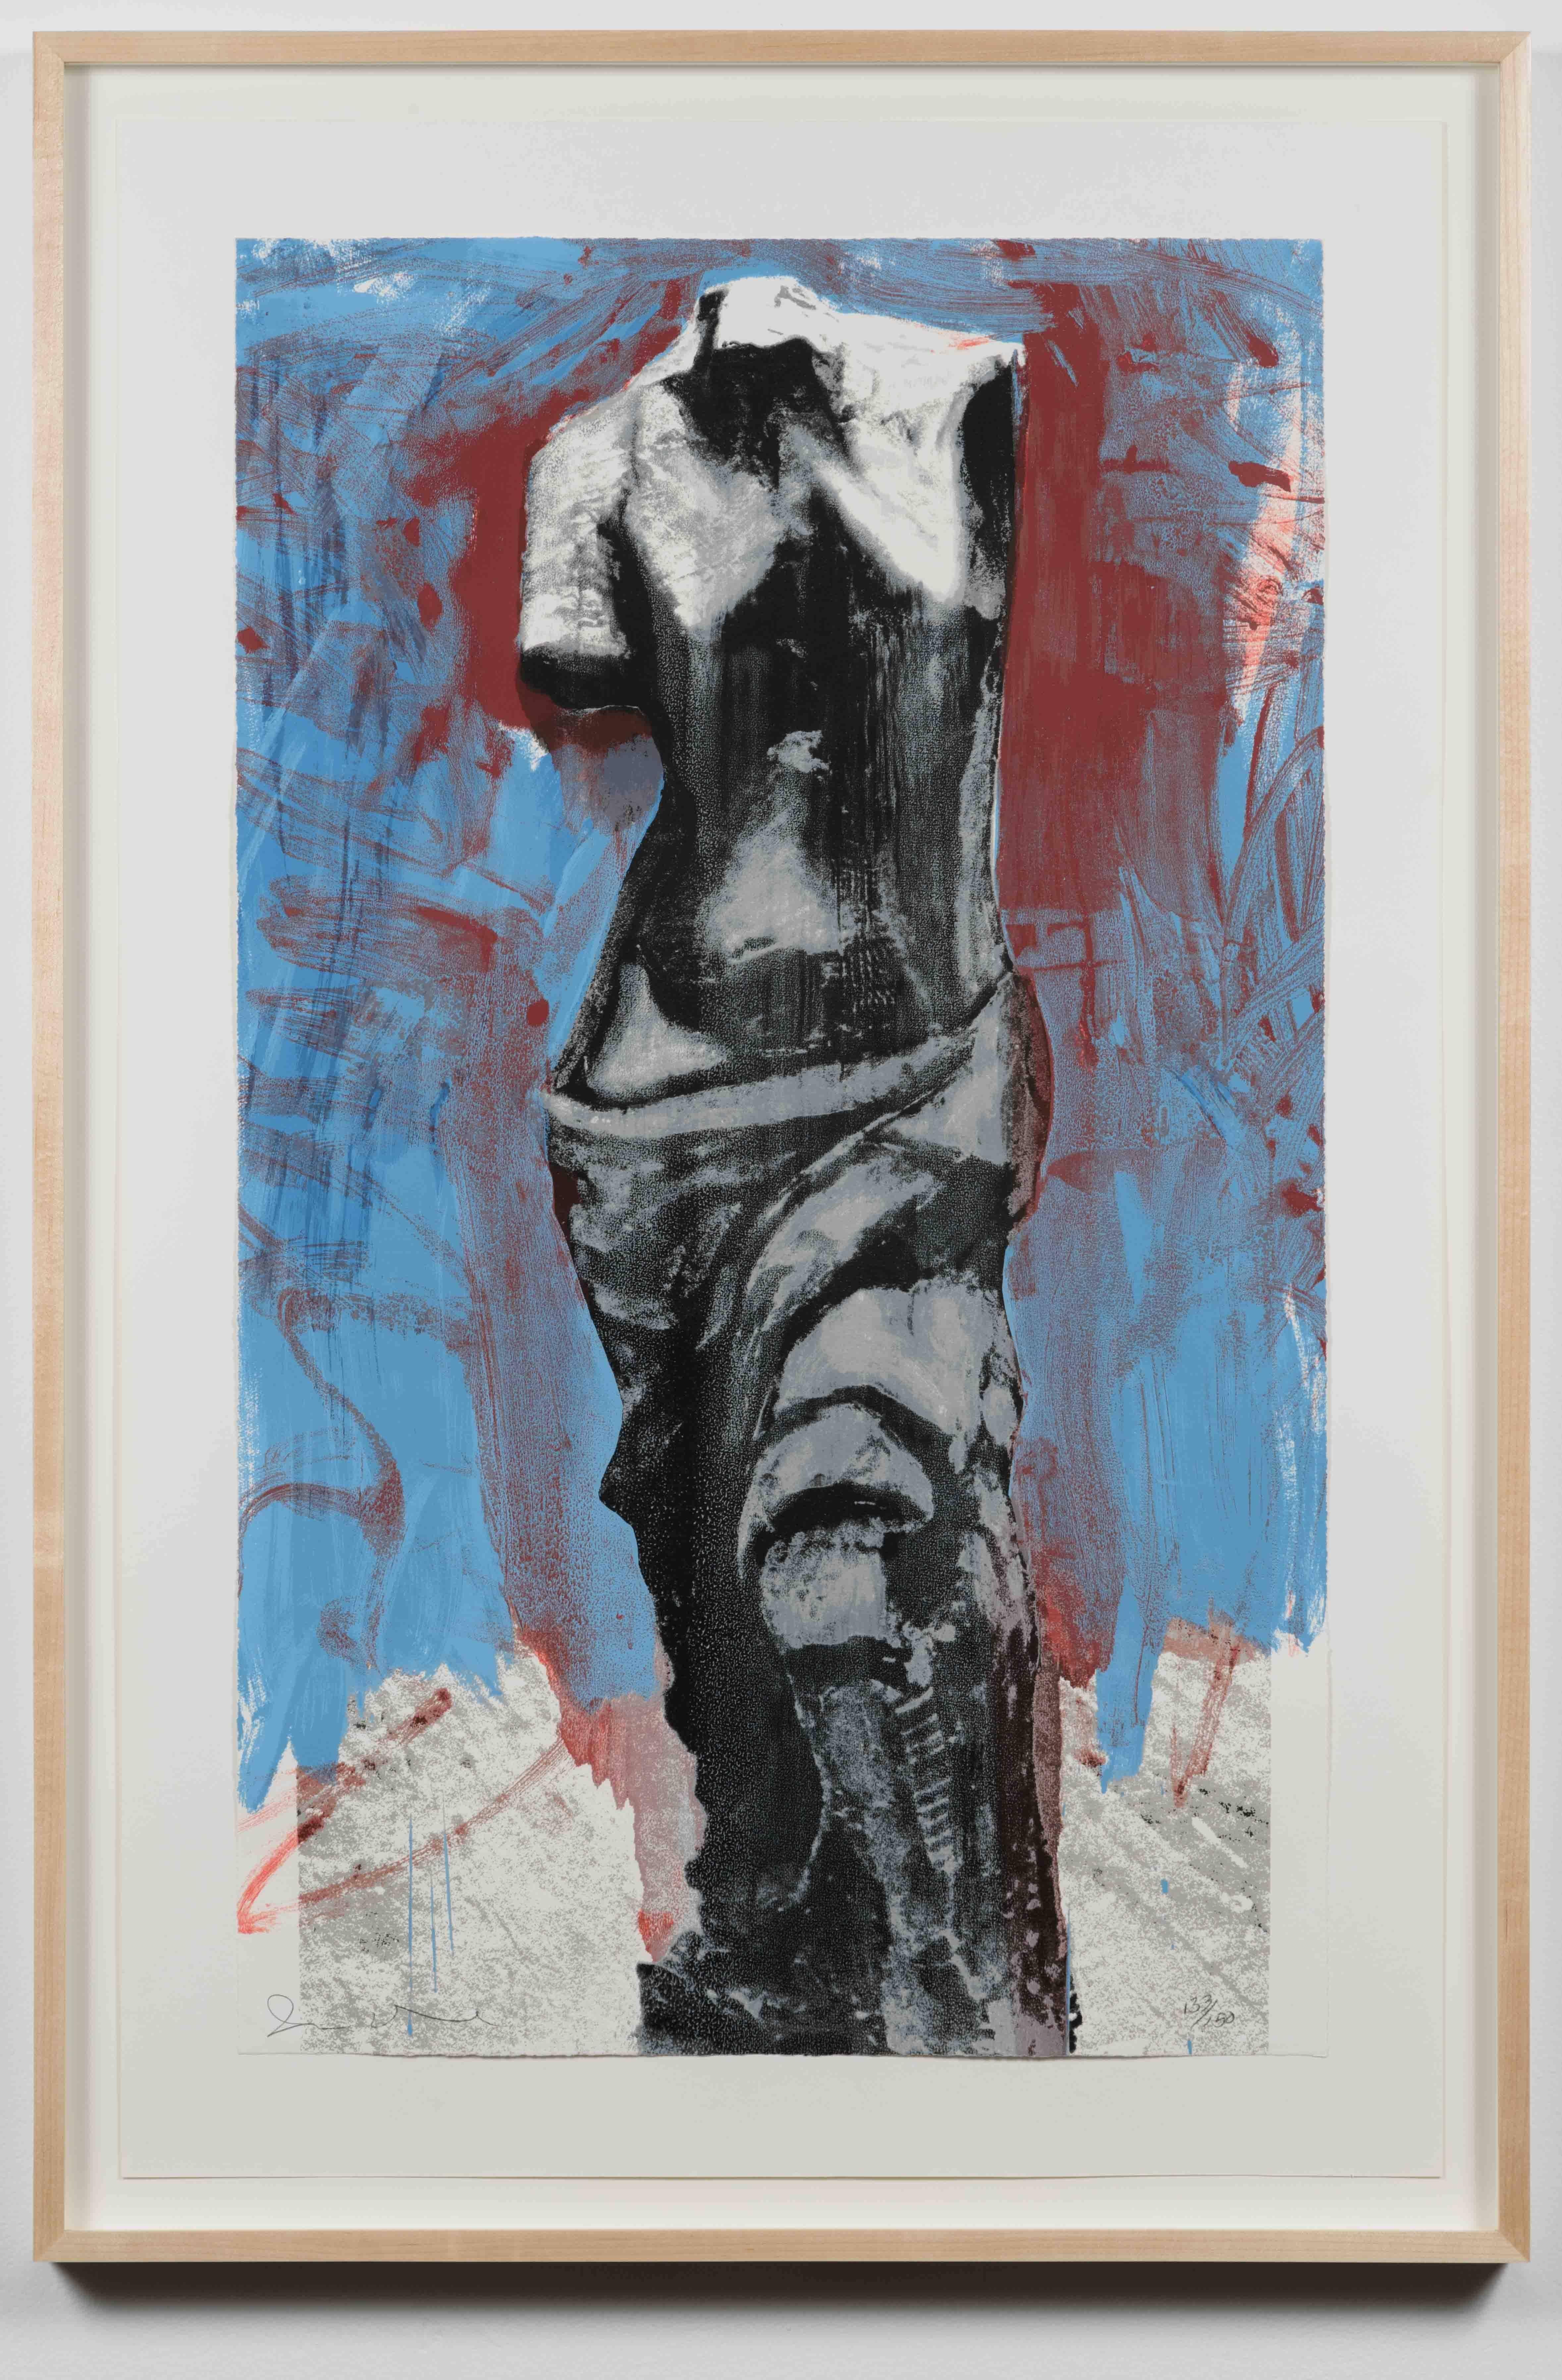 Red, White and Blue Venus - Contemporary Print by Jim Dine